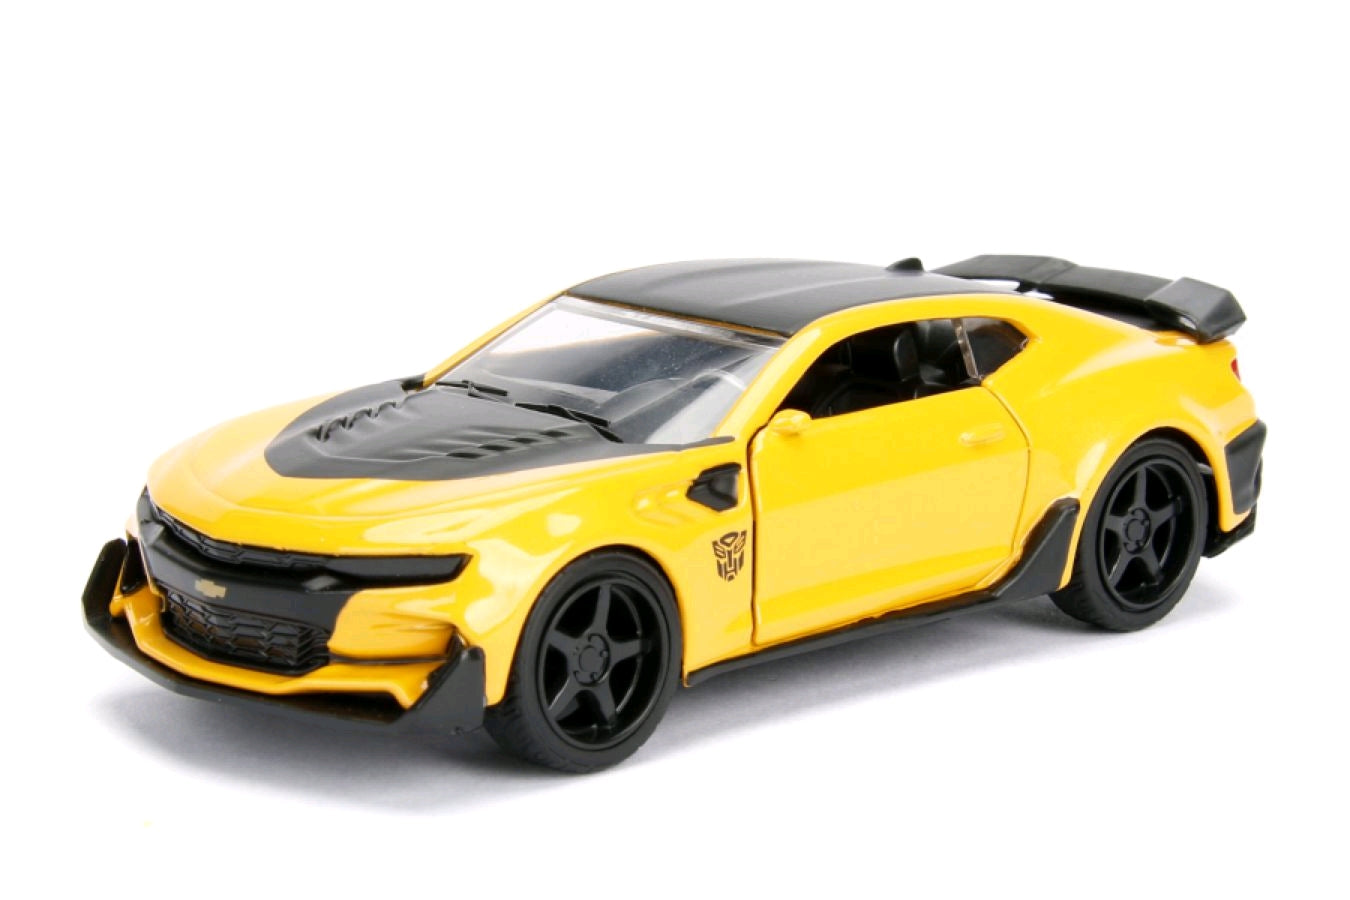 Transformers - Bumblebee 2017 1:32 Scale Hollywood Ride - Ozzie Collectables